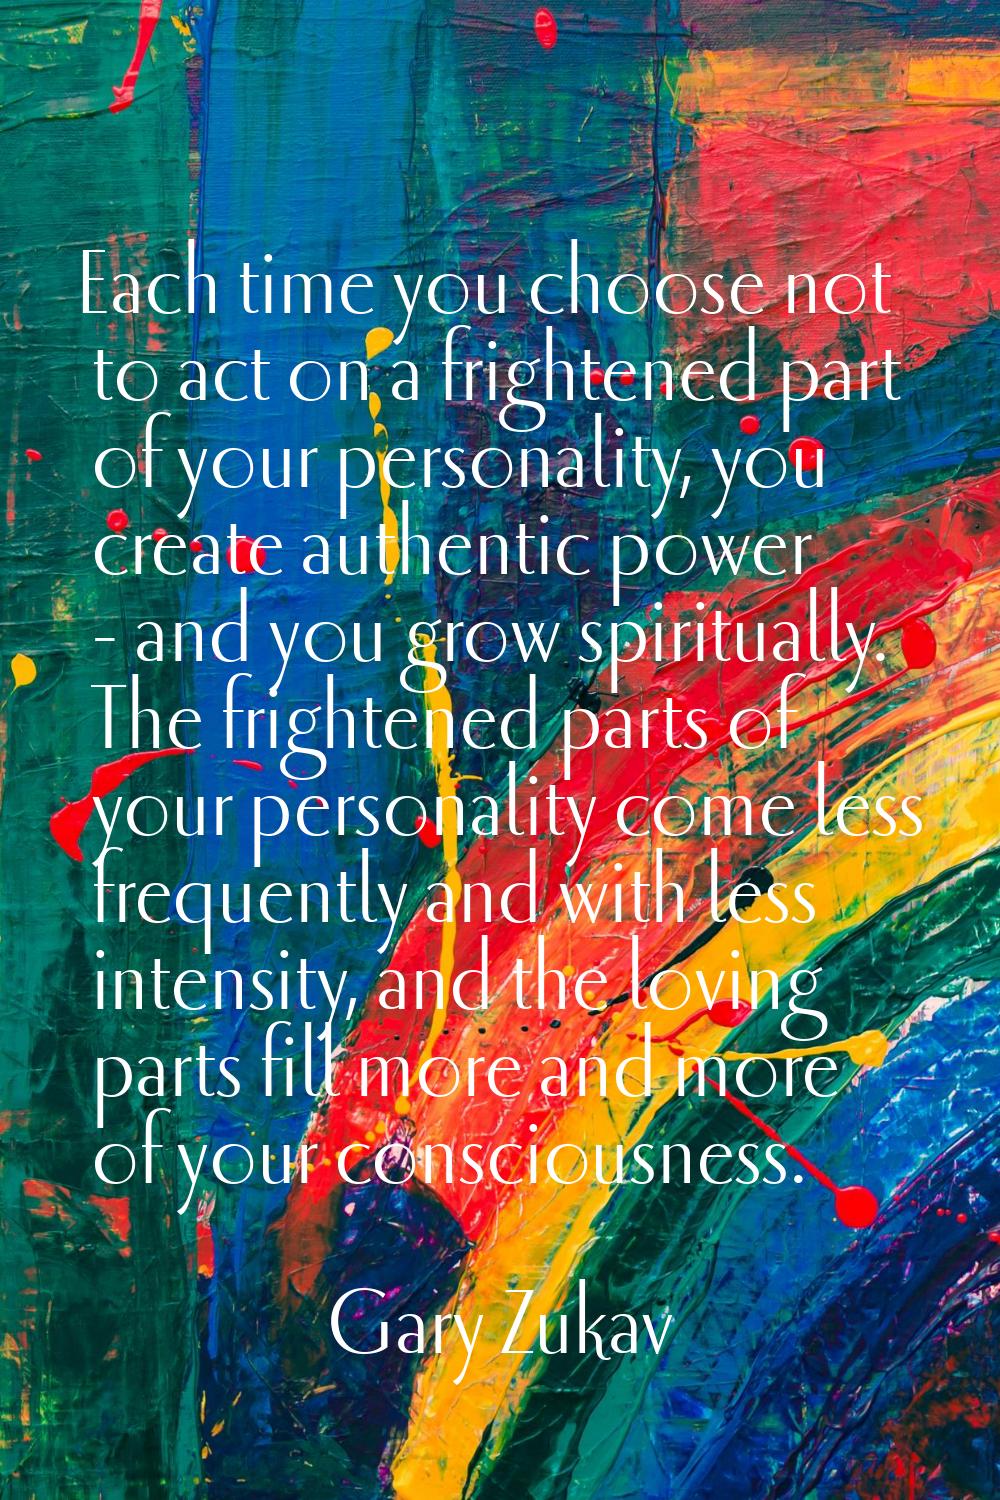 Each time you choose not to act on a frightened part of your personality, you create authentic powe